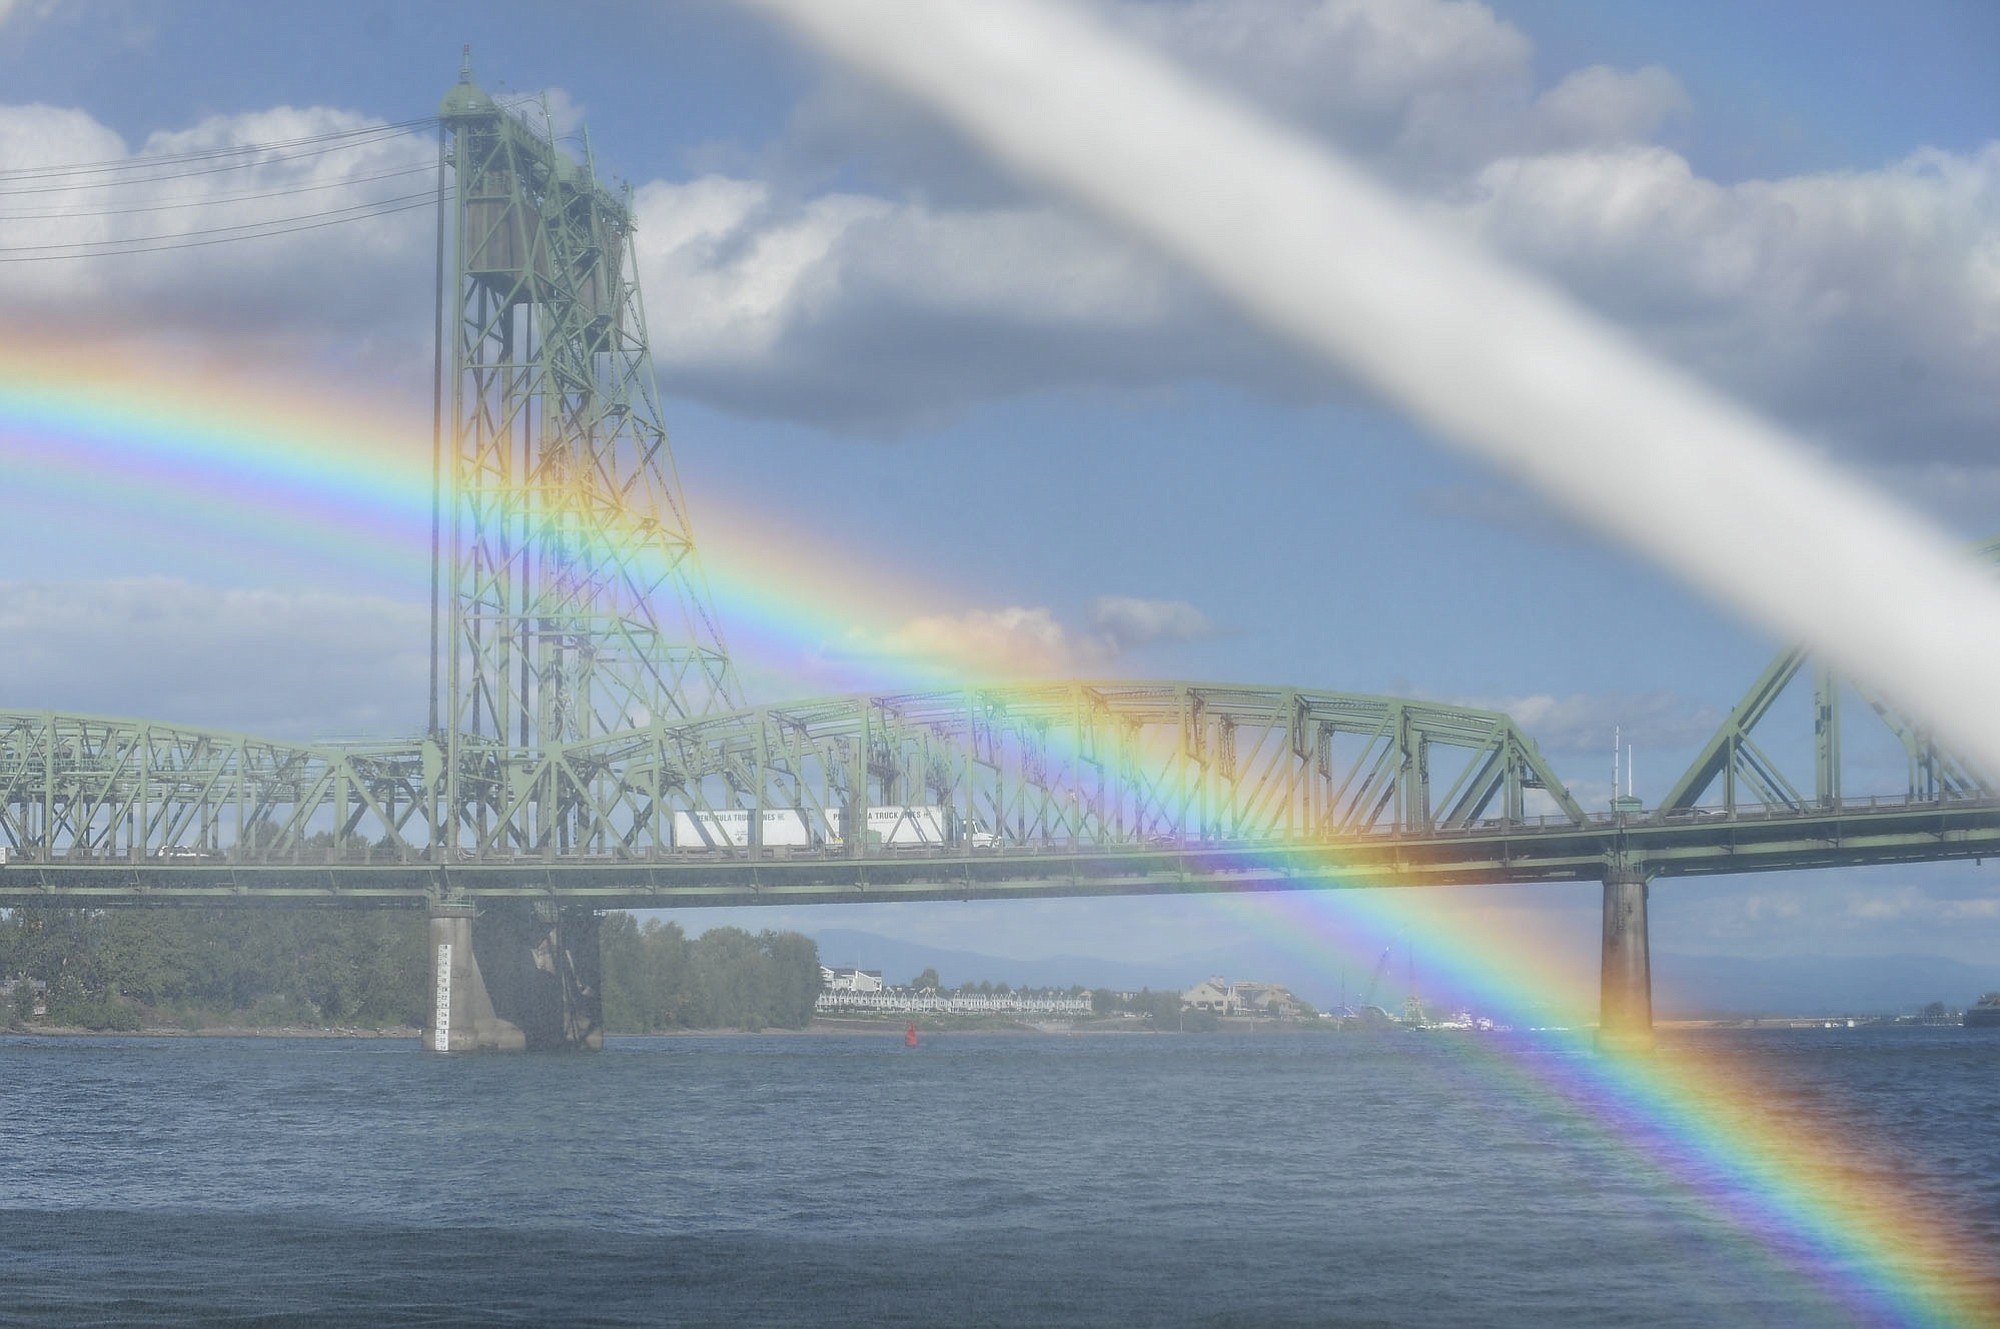 Spray from the Discovery fire boat's water cannons creates rainbows Monday near the Interstate 5 Bridge in Vancouver.